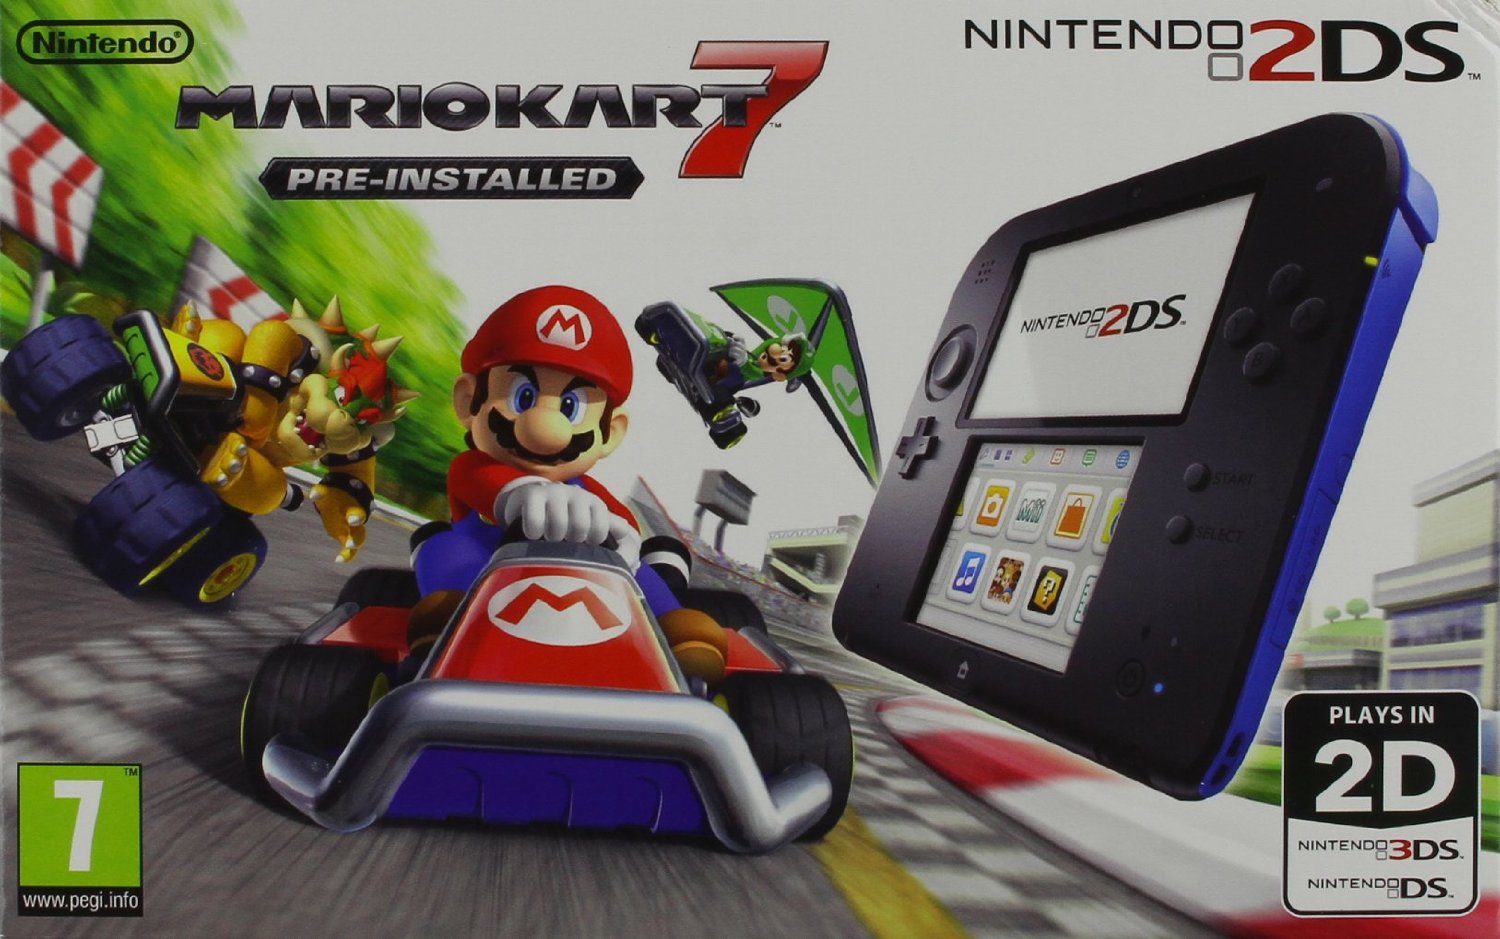 Nintendo 2DS Console with Pre-installed Mario Kart 7 (Black/Blue) (Nintendo 2DS)